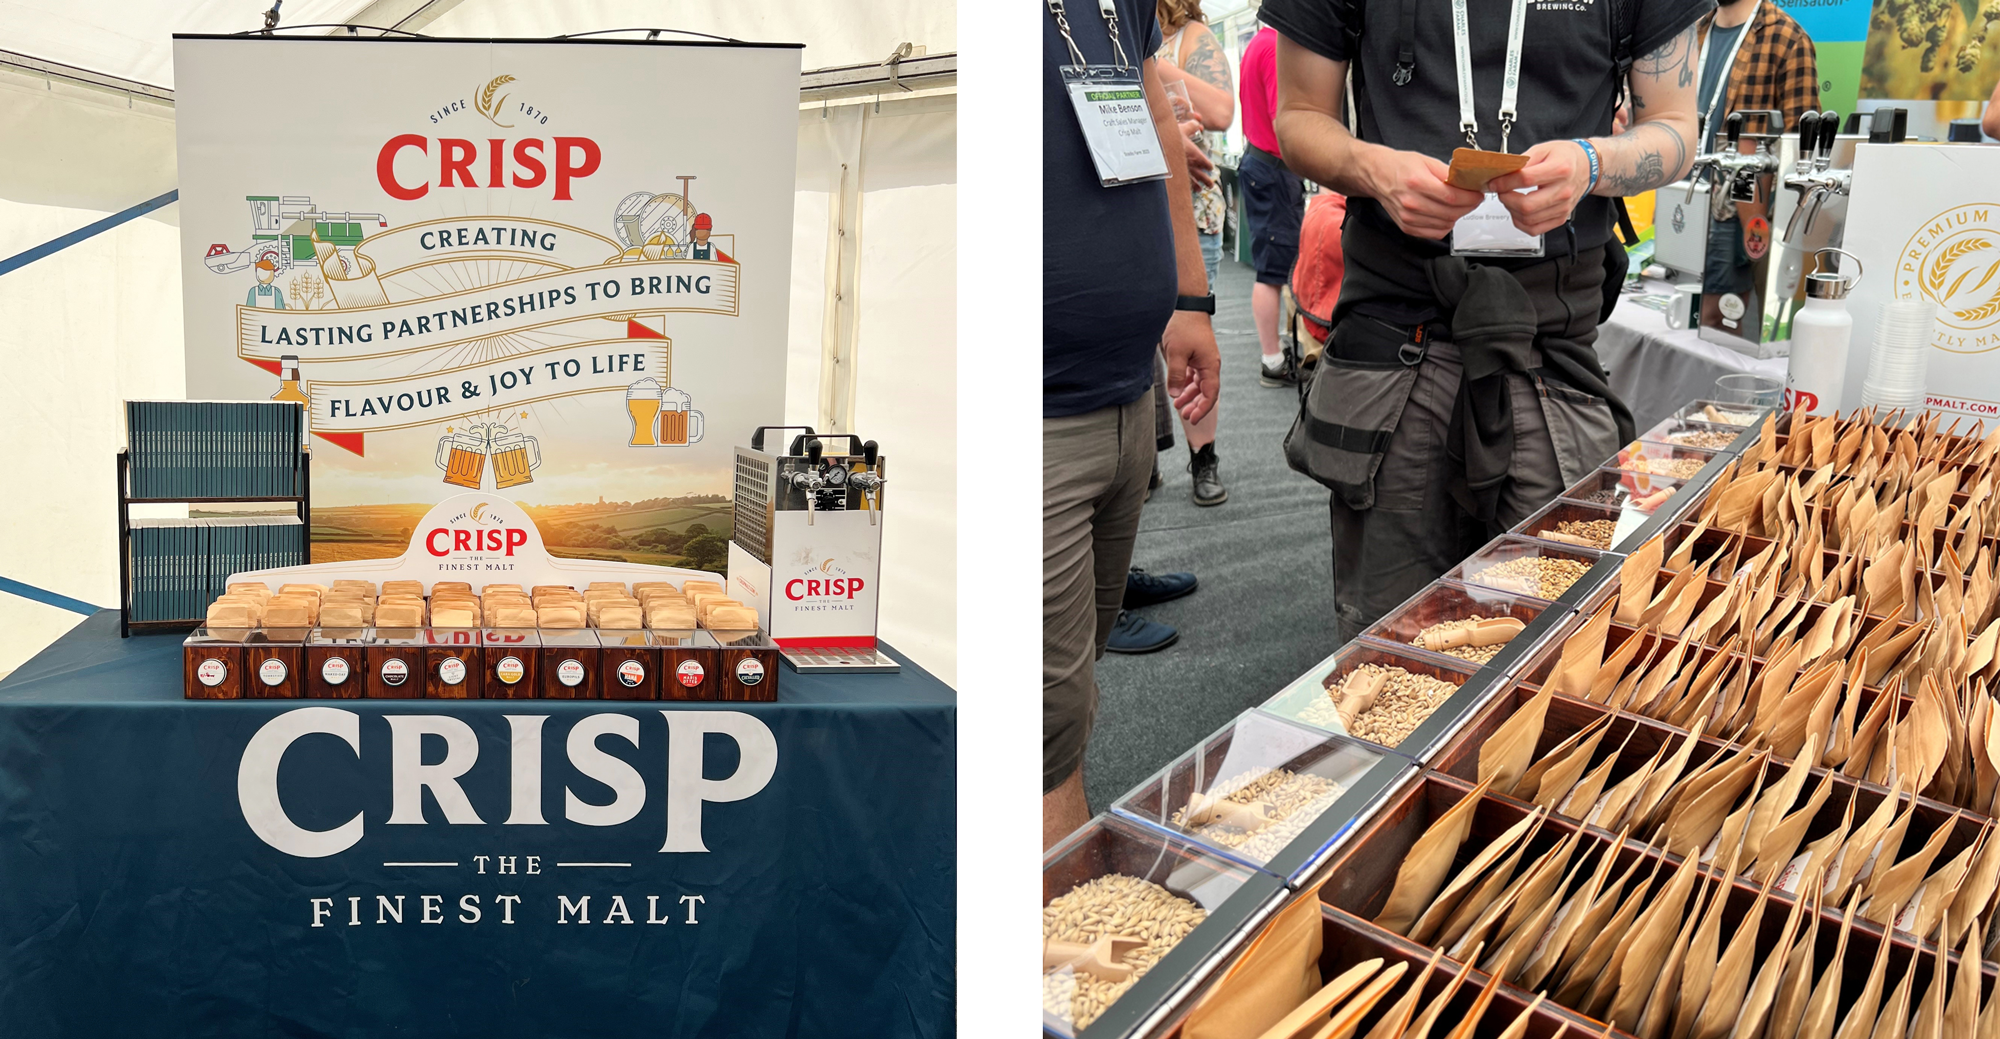 Malt Stand with Crisp signage and sample packs